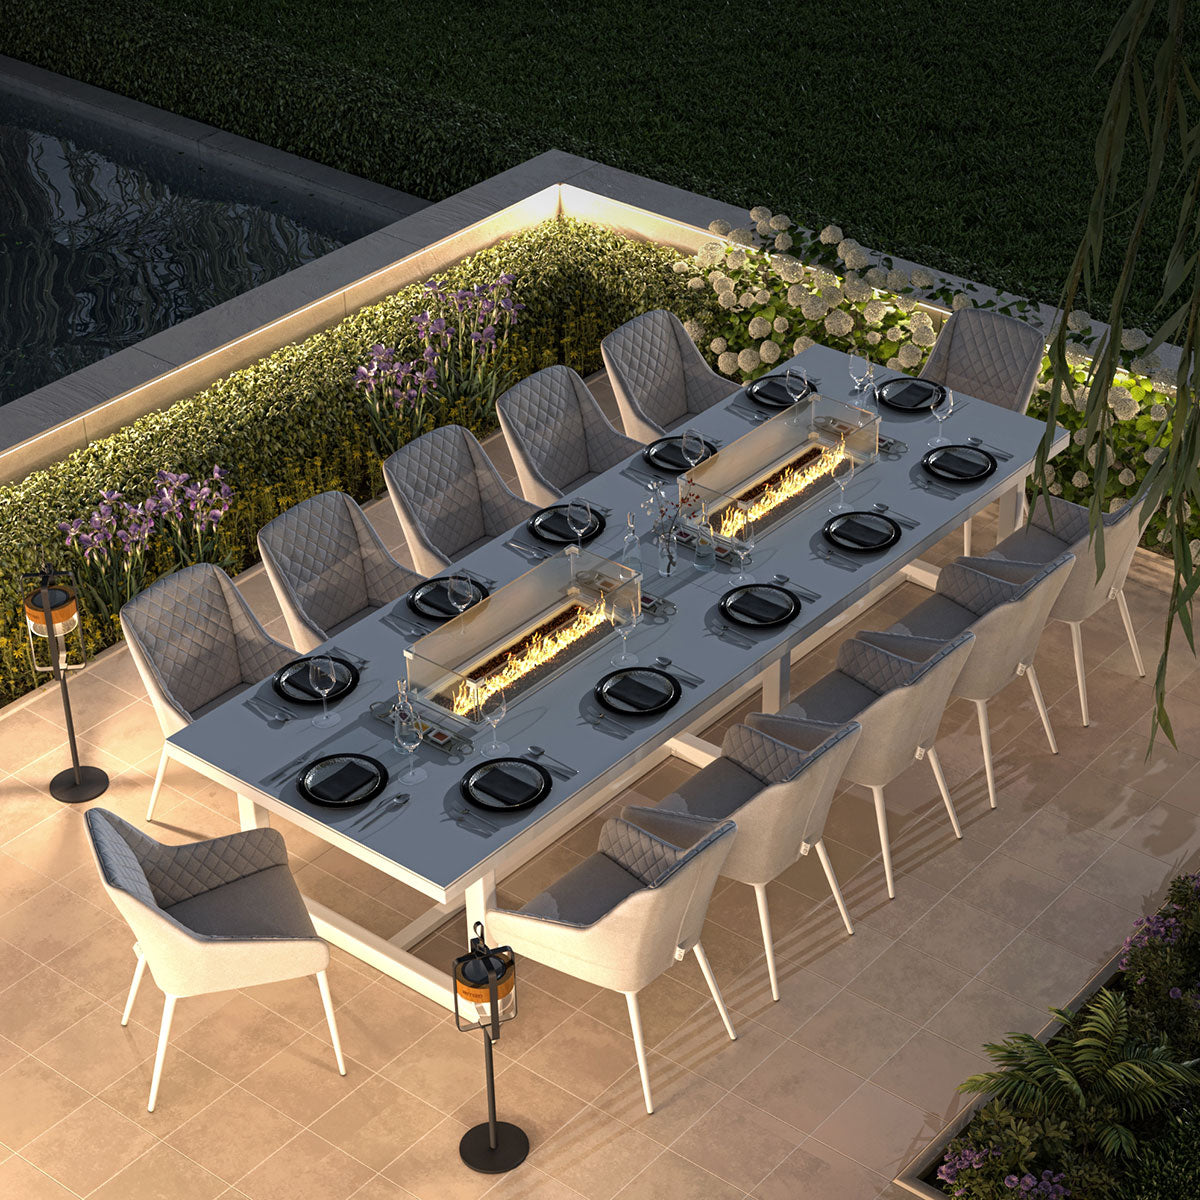 Maze - Outdoor Fabric Zest 12 Seat Rectangular Dining Set with Fire Pit Table - Lead Chine